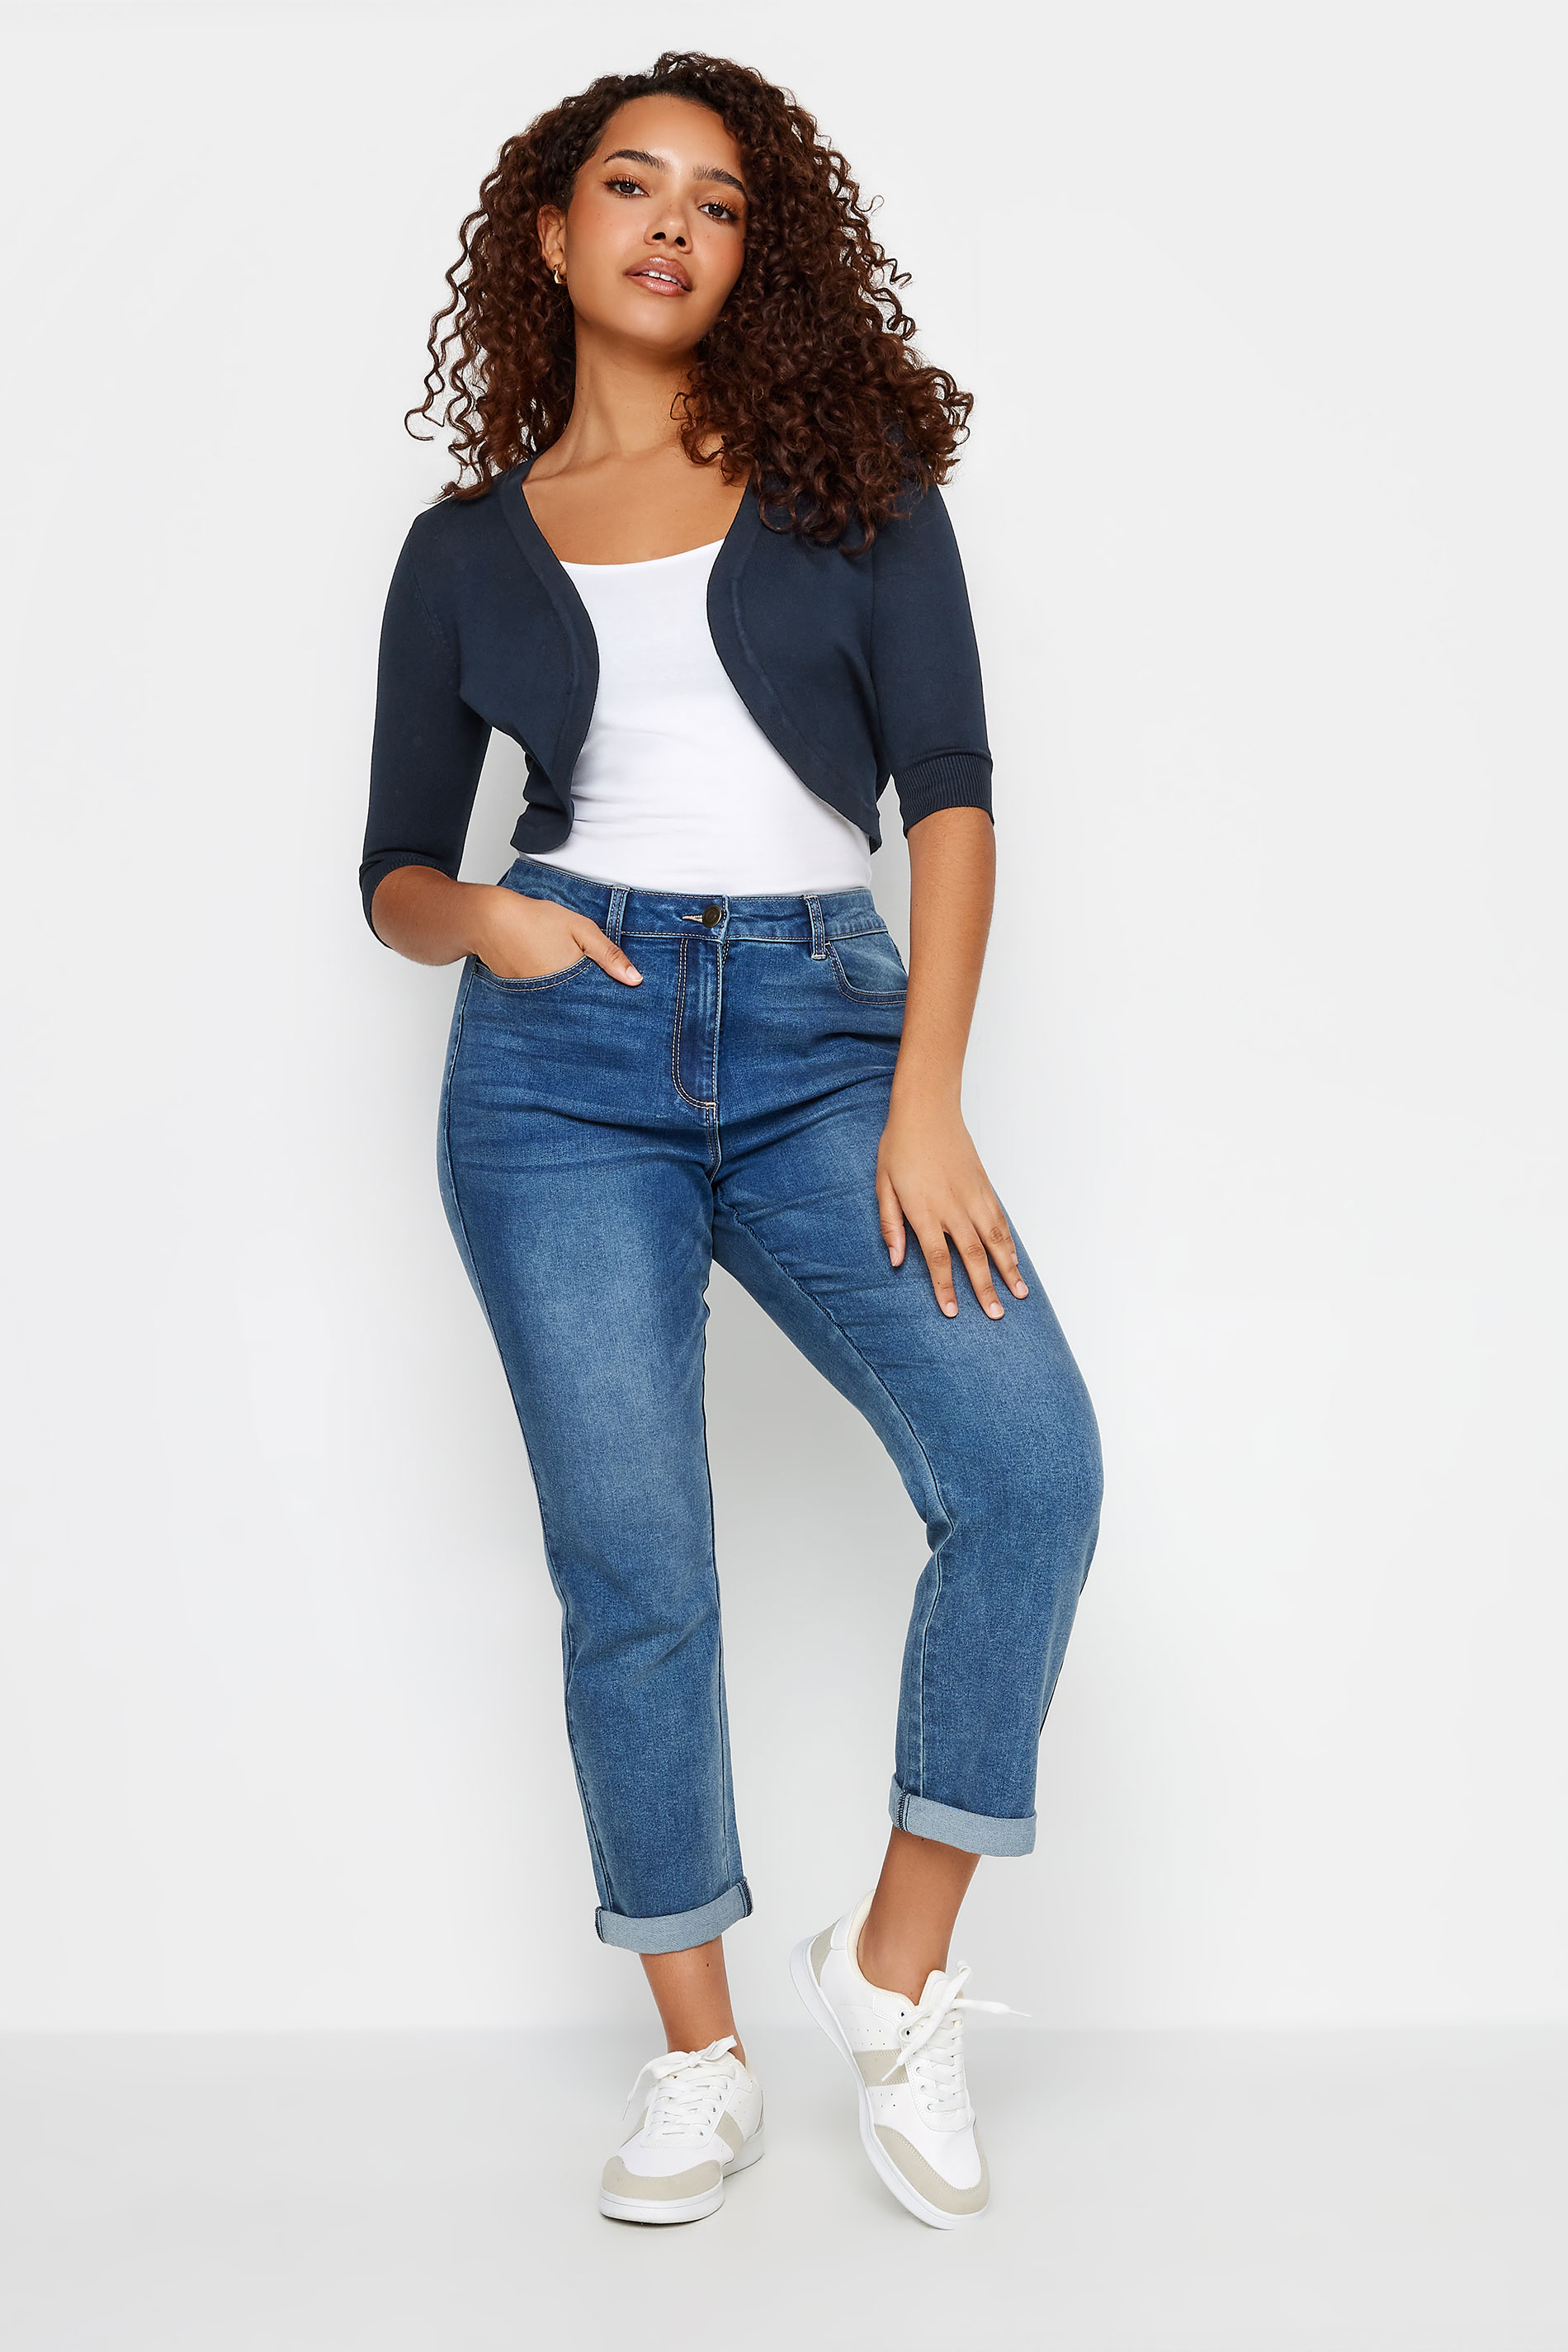 M&Co Navy Blue Cropped Cardigan | M&Co